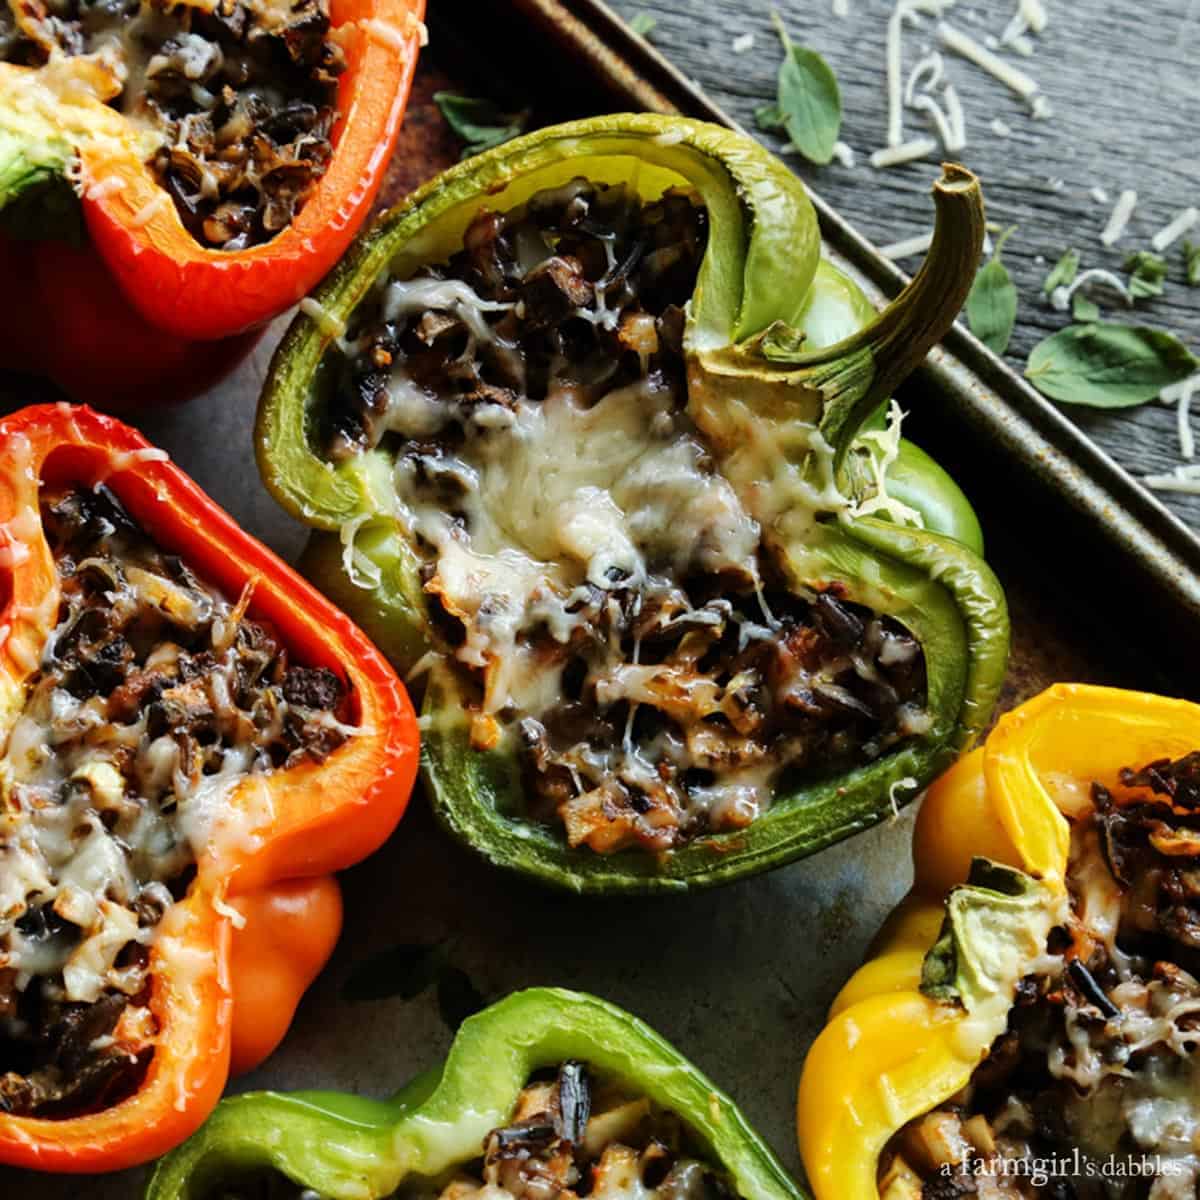 Stuffed peppers with rice are shown on a rimmed pan.